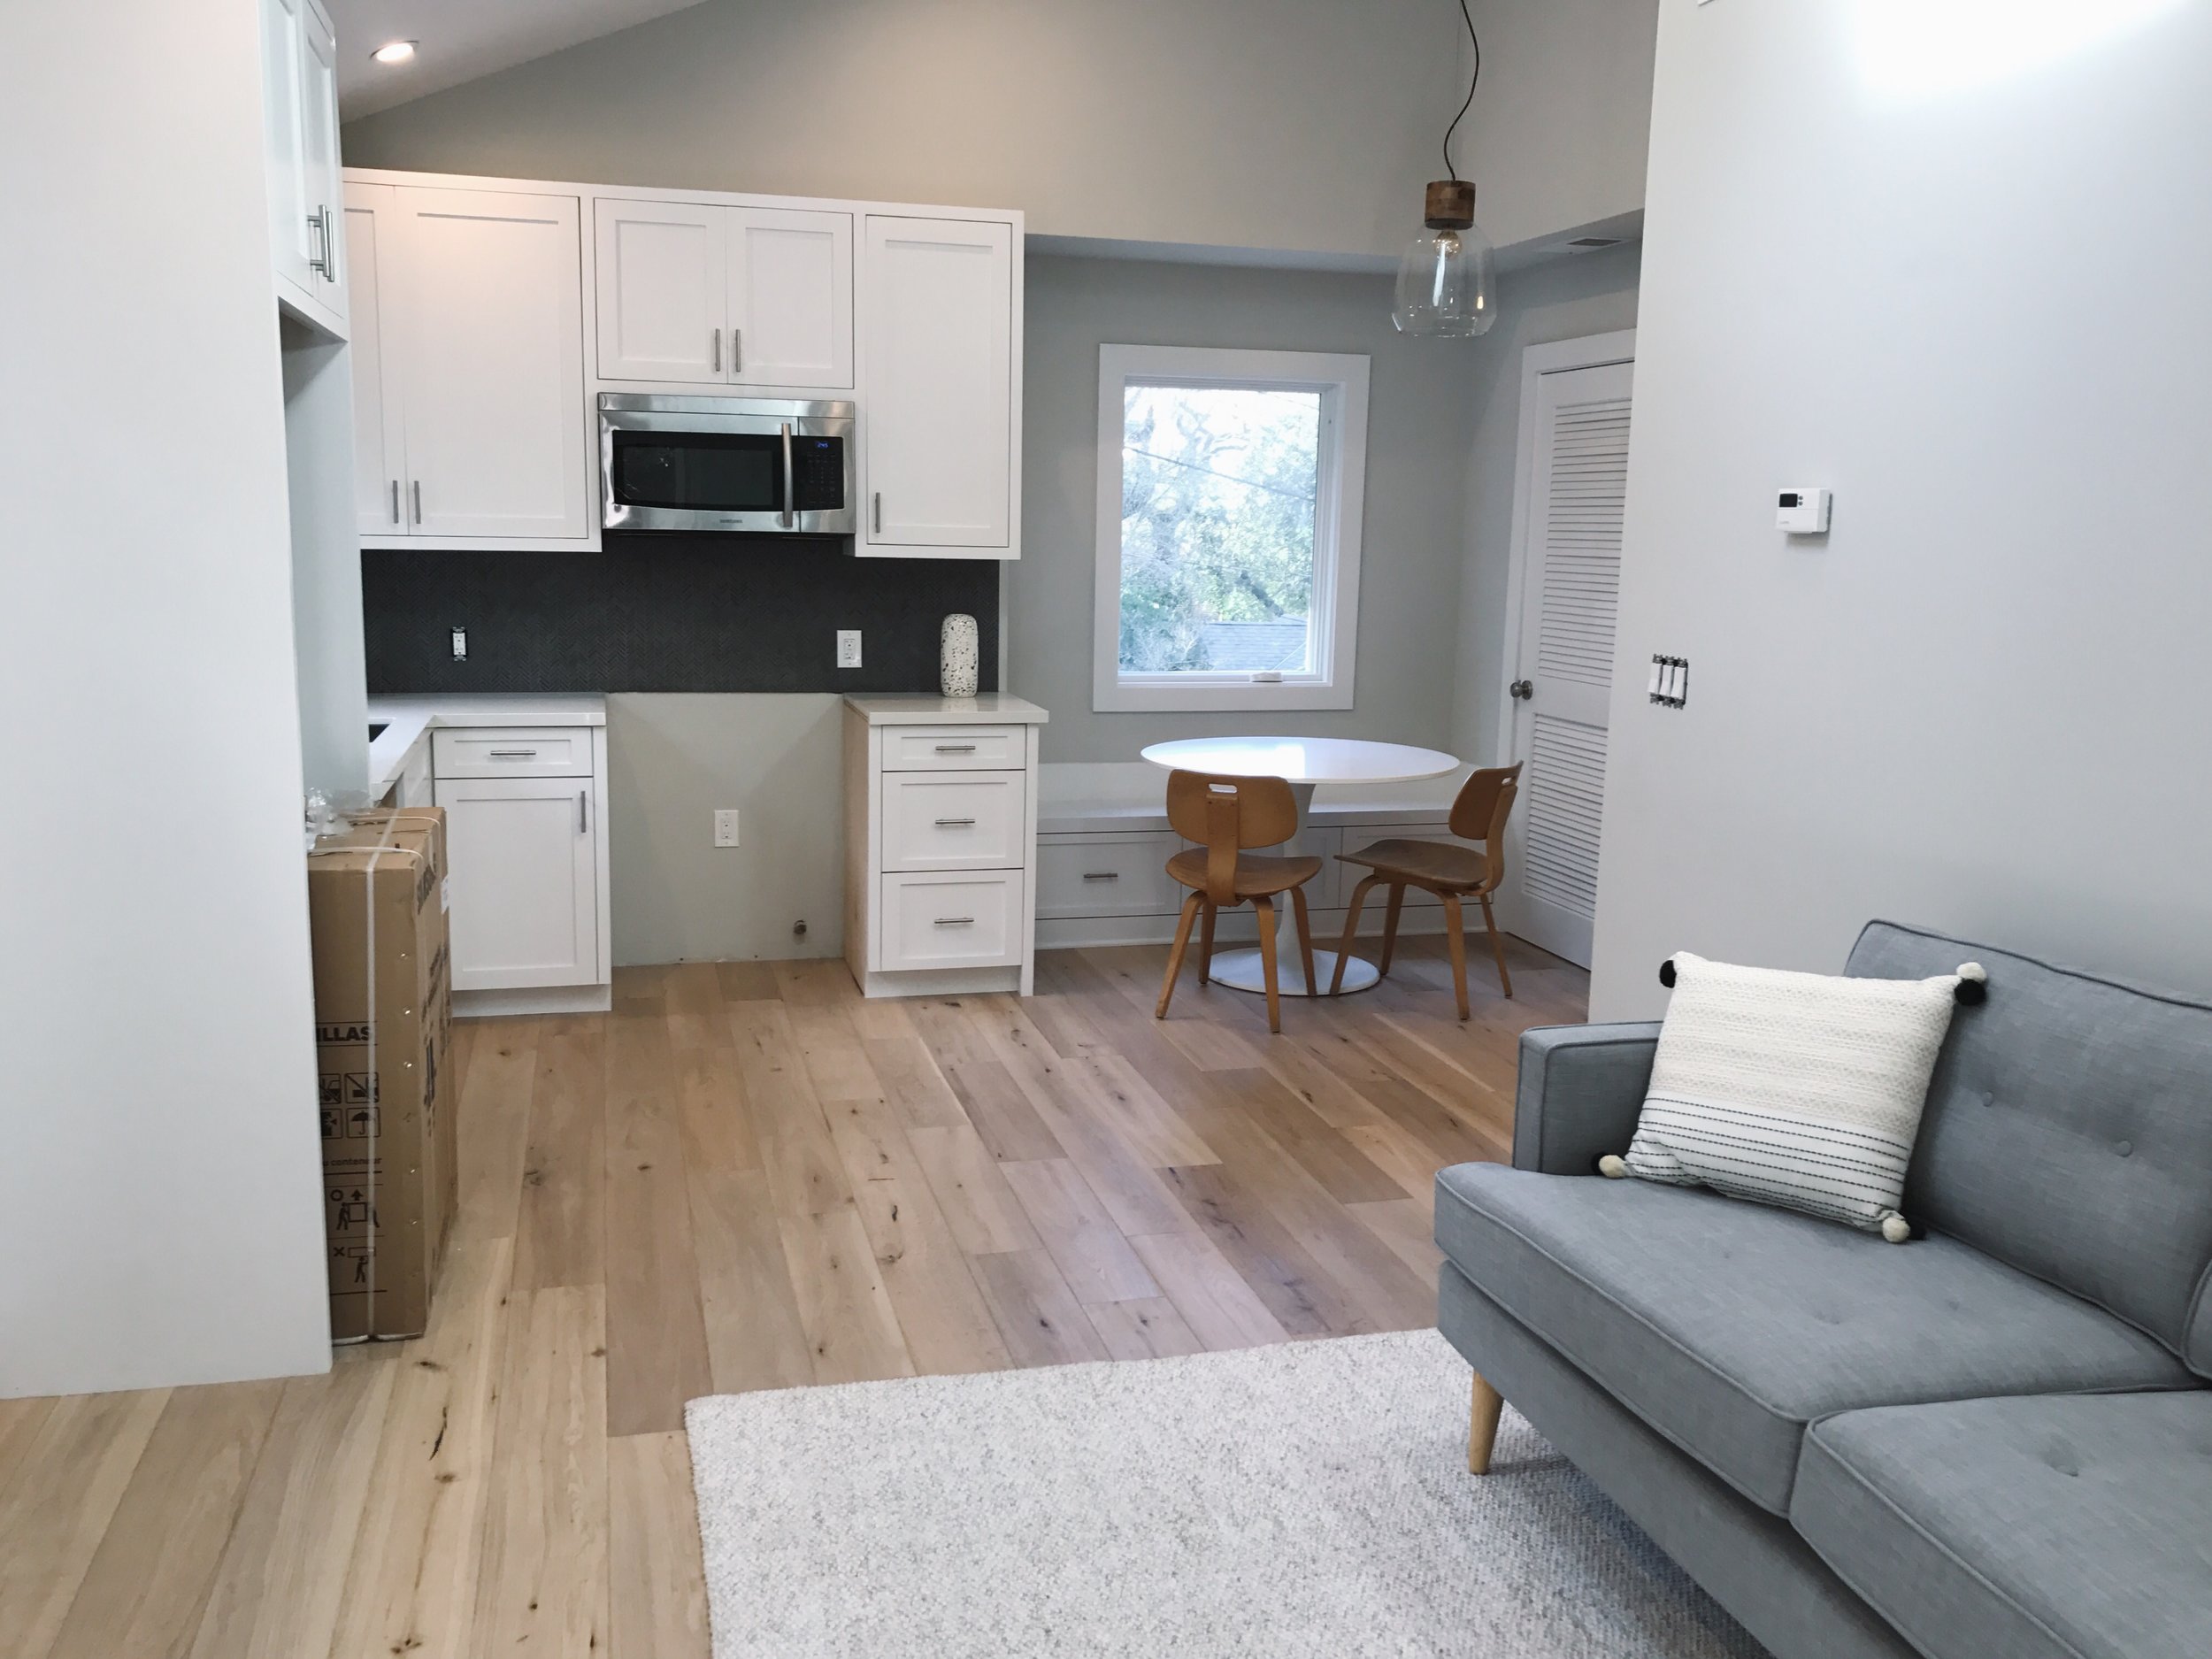  An open living space and vaulted ceilings can make a world of difference in a small space. (Appliances haven't been installed yet.) 